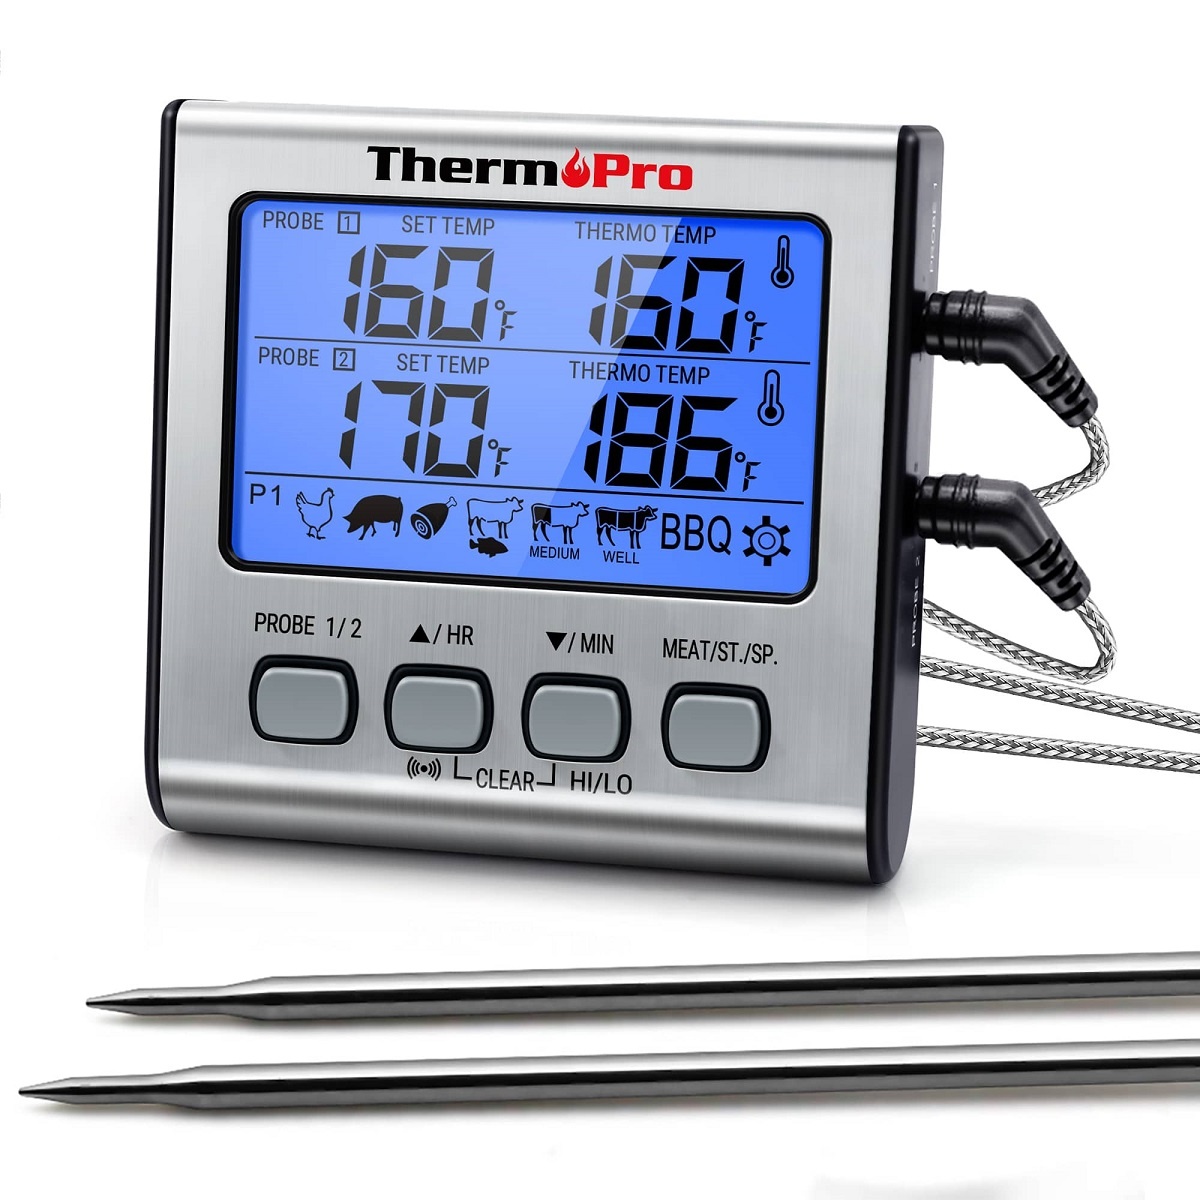 ThermoPro launches smart dual probe meat thermometer with Bluetooth range